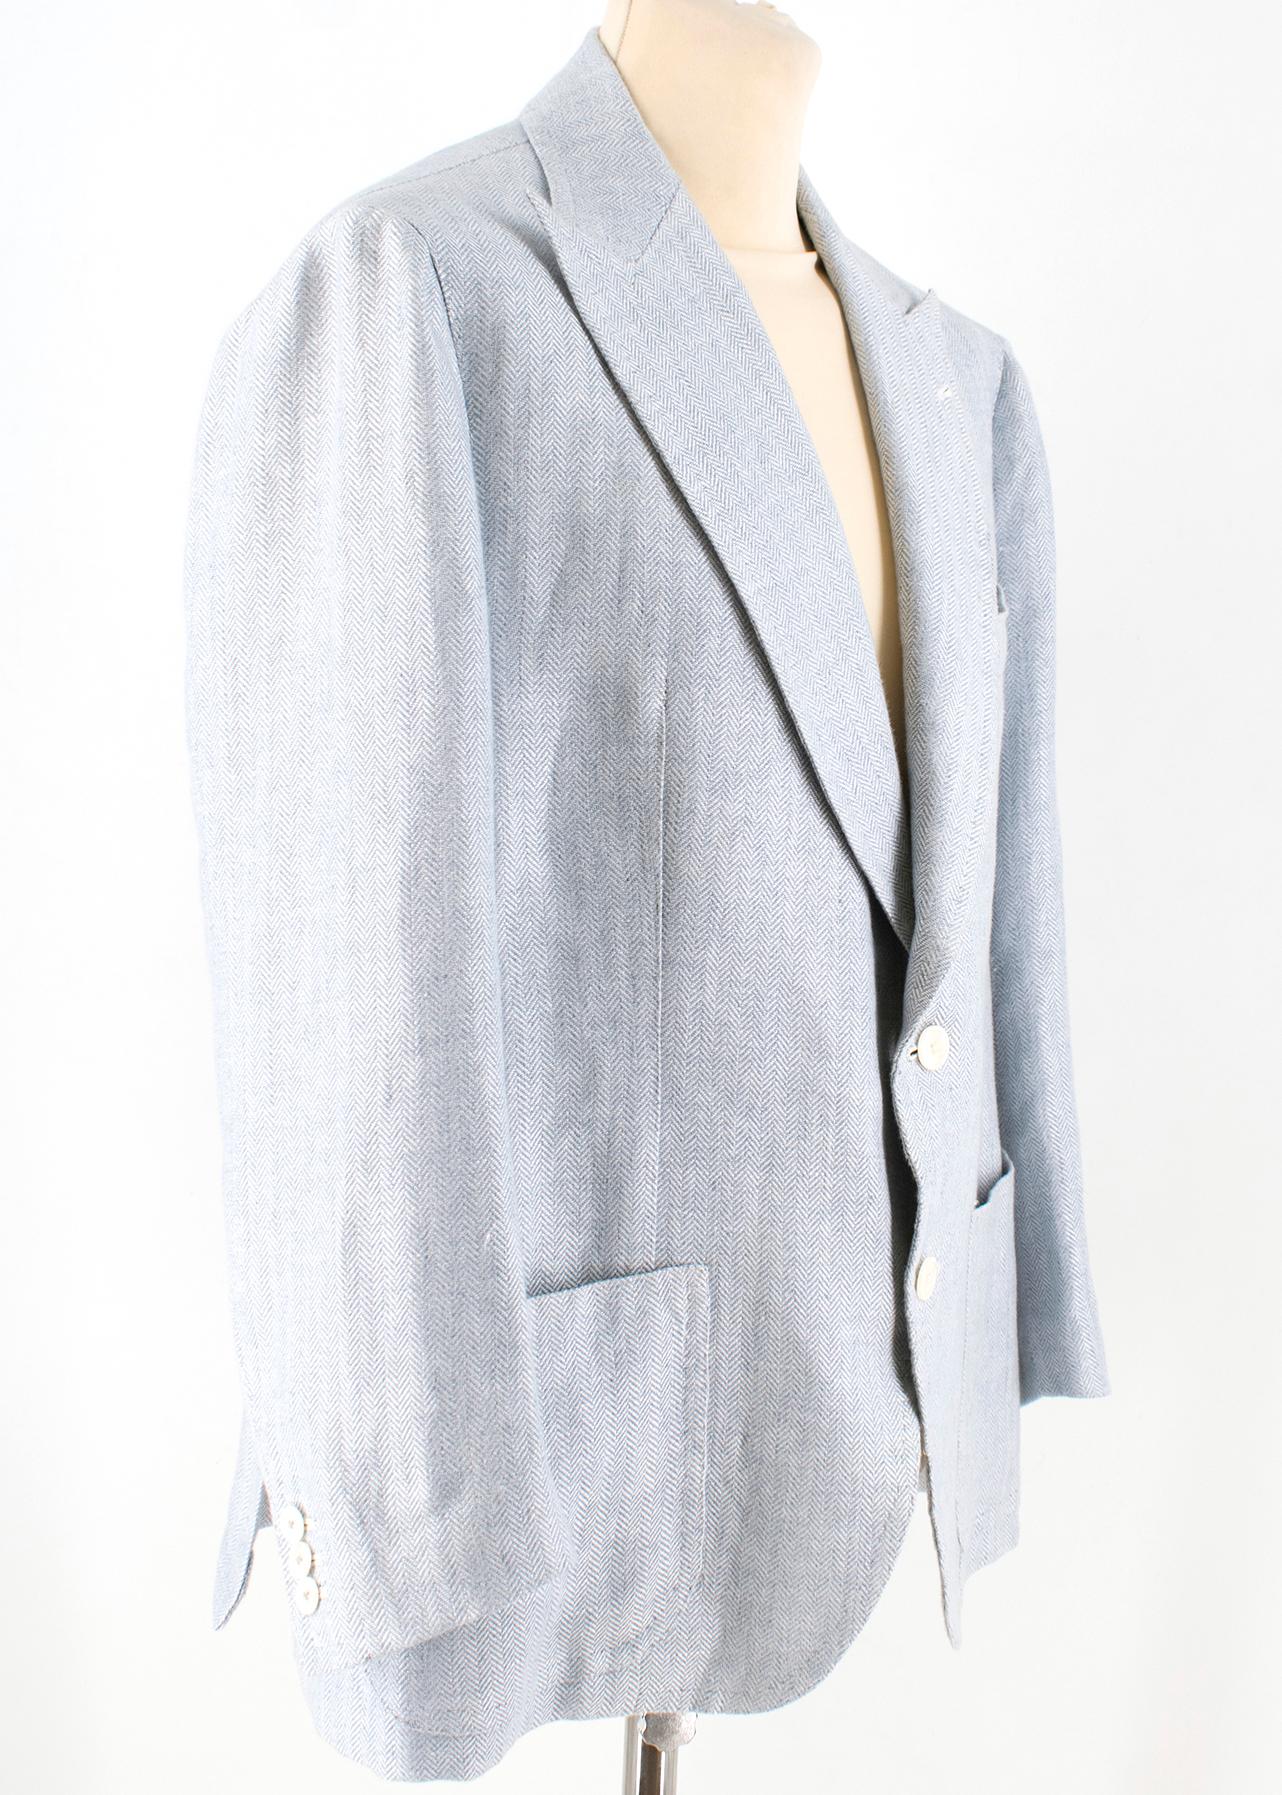 Gianni Volpe Light Blue Herringbone Single Breasted Blazer

- Light blue blazer
- Lightweight
- Herringbone
- Single breasted two buttons fastening
- Peak lapels
- Chest welt pocket
- Front patch pockets
- Buttoned cuffs
- Internal two slip